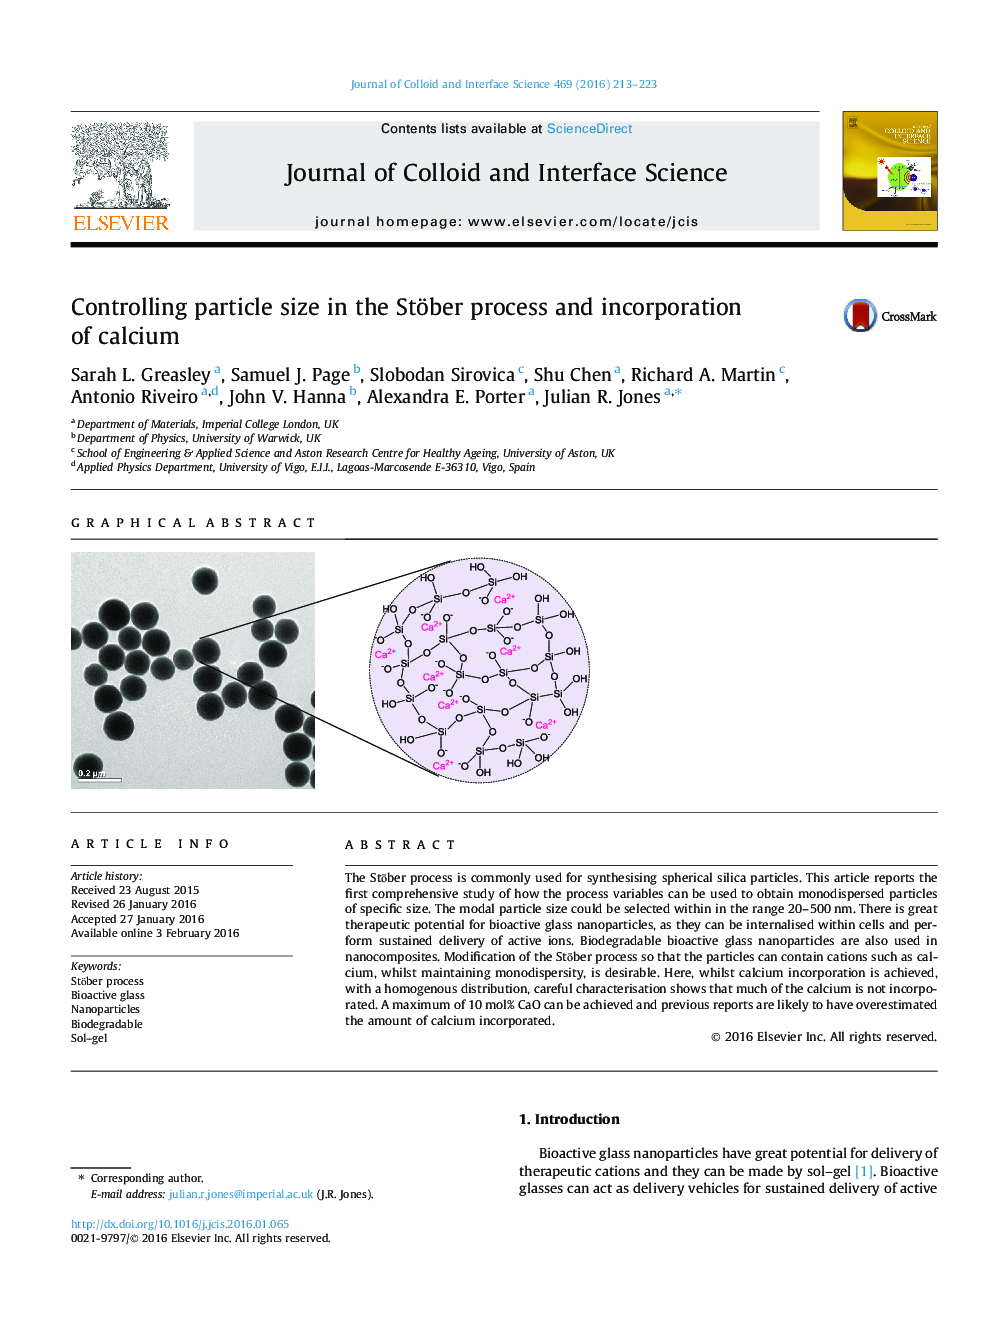 Controlling particle size in the Stöber process and incorporation of calcium